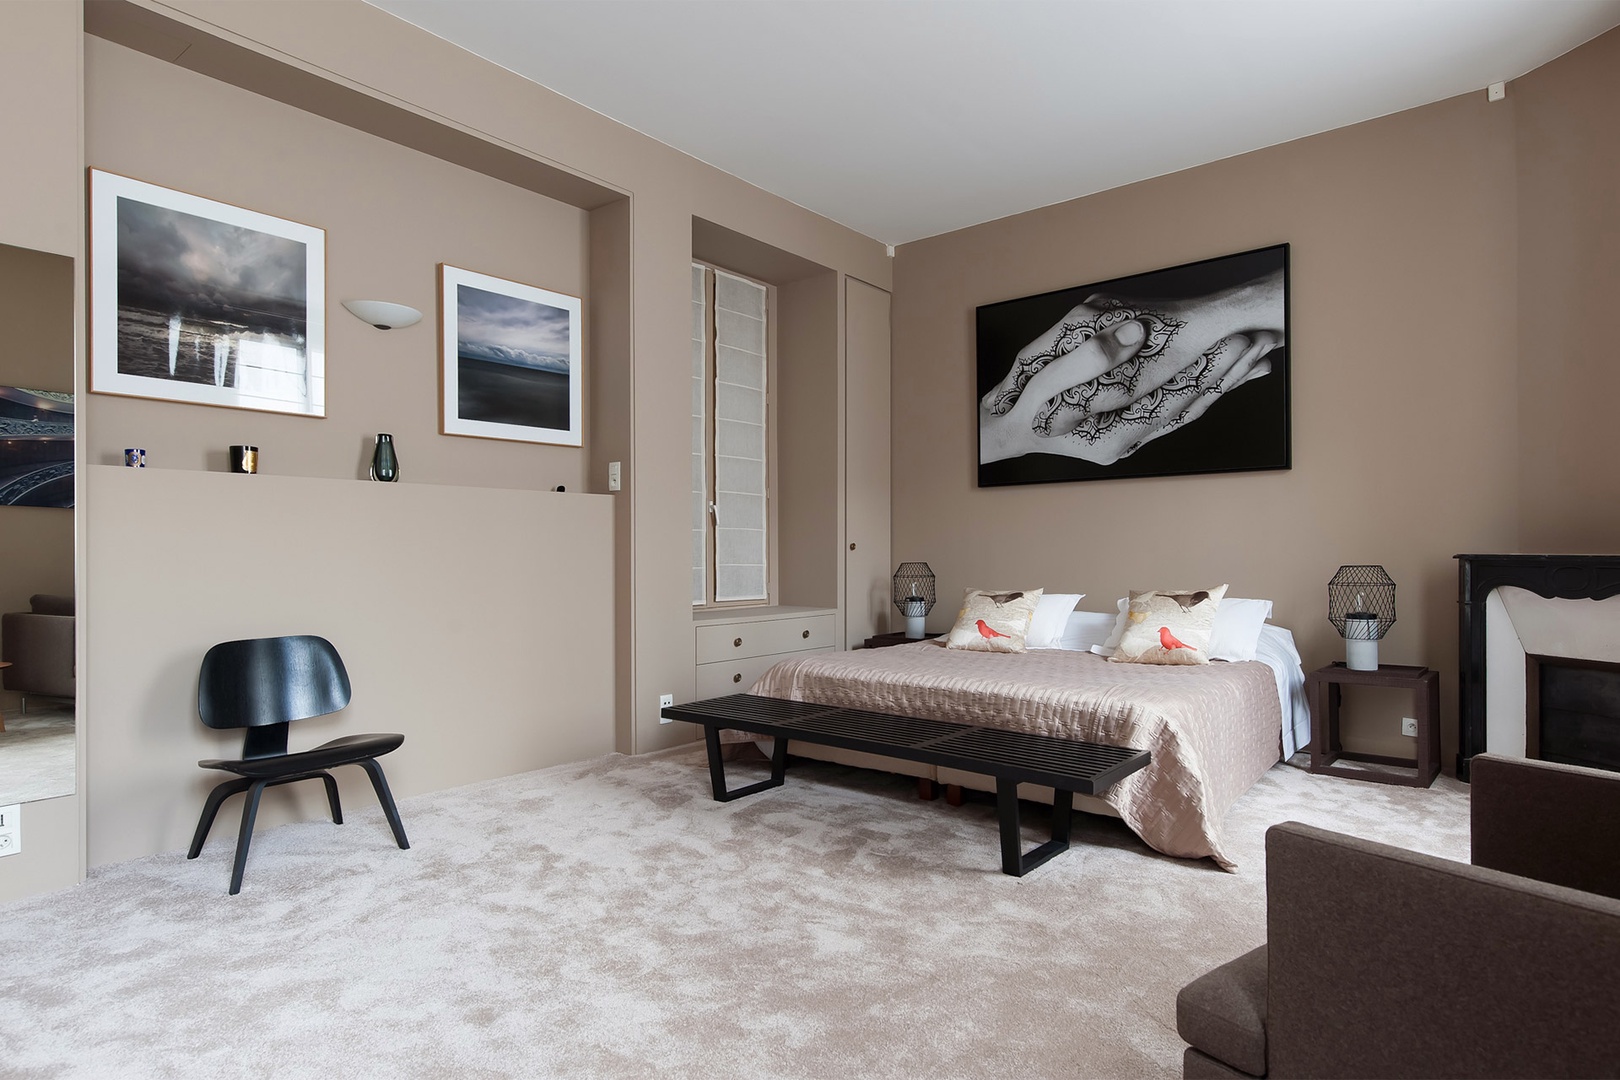 The bedroom exudes luxury and artistic flair.